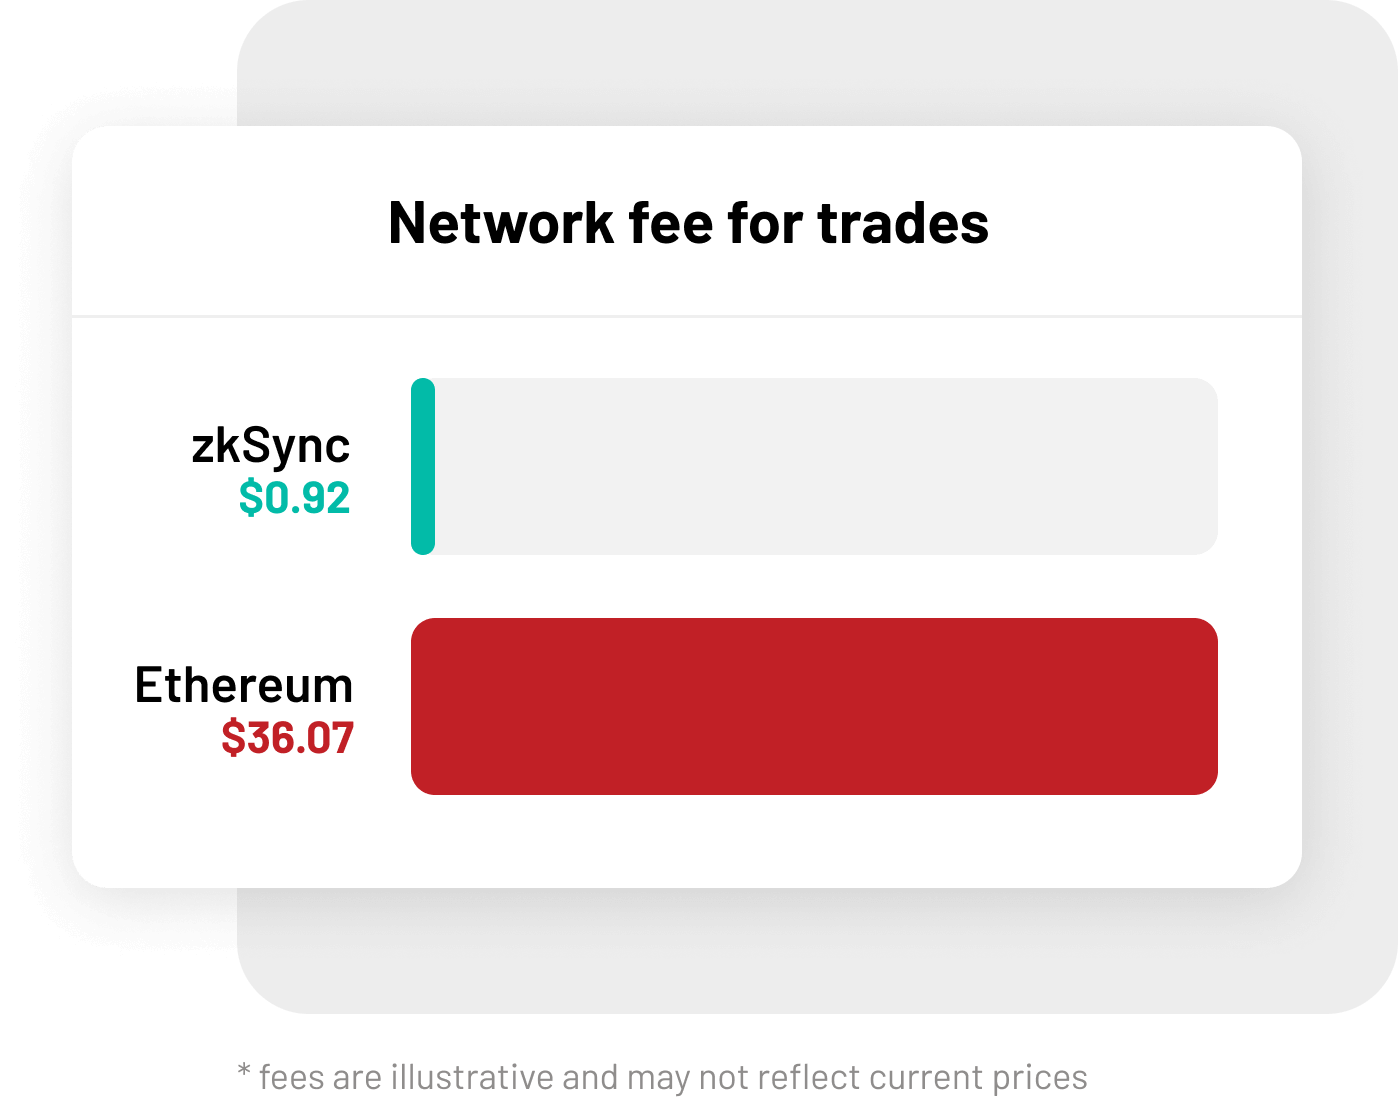 zkSync is significantly cheaper than Ethereum